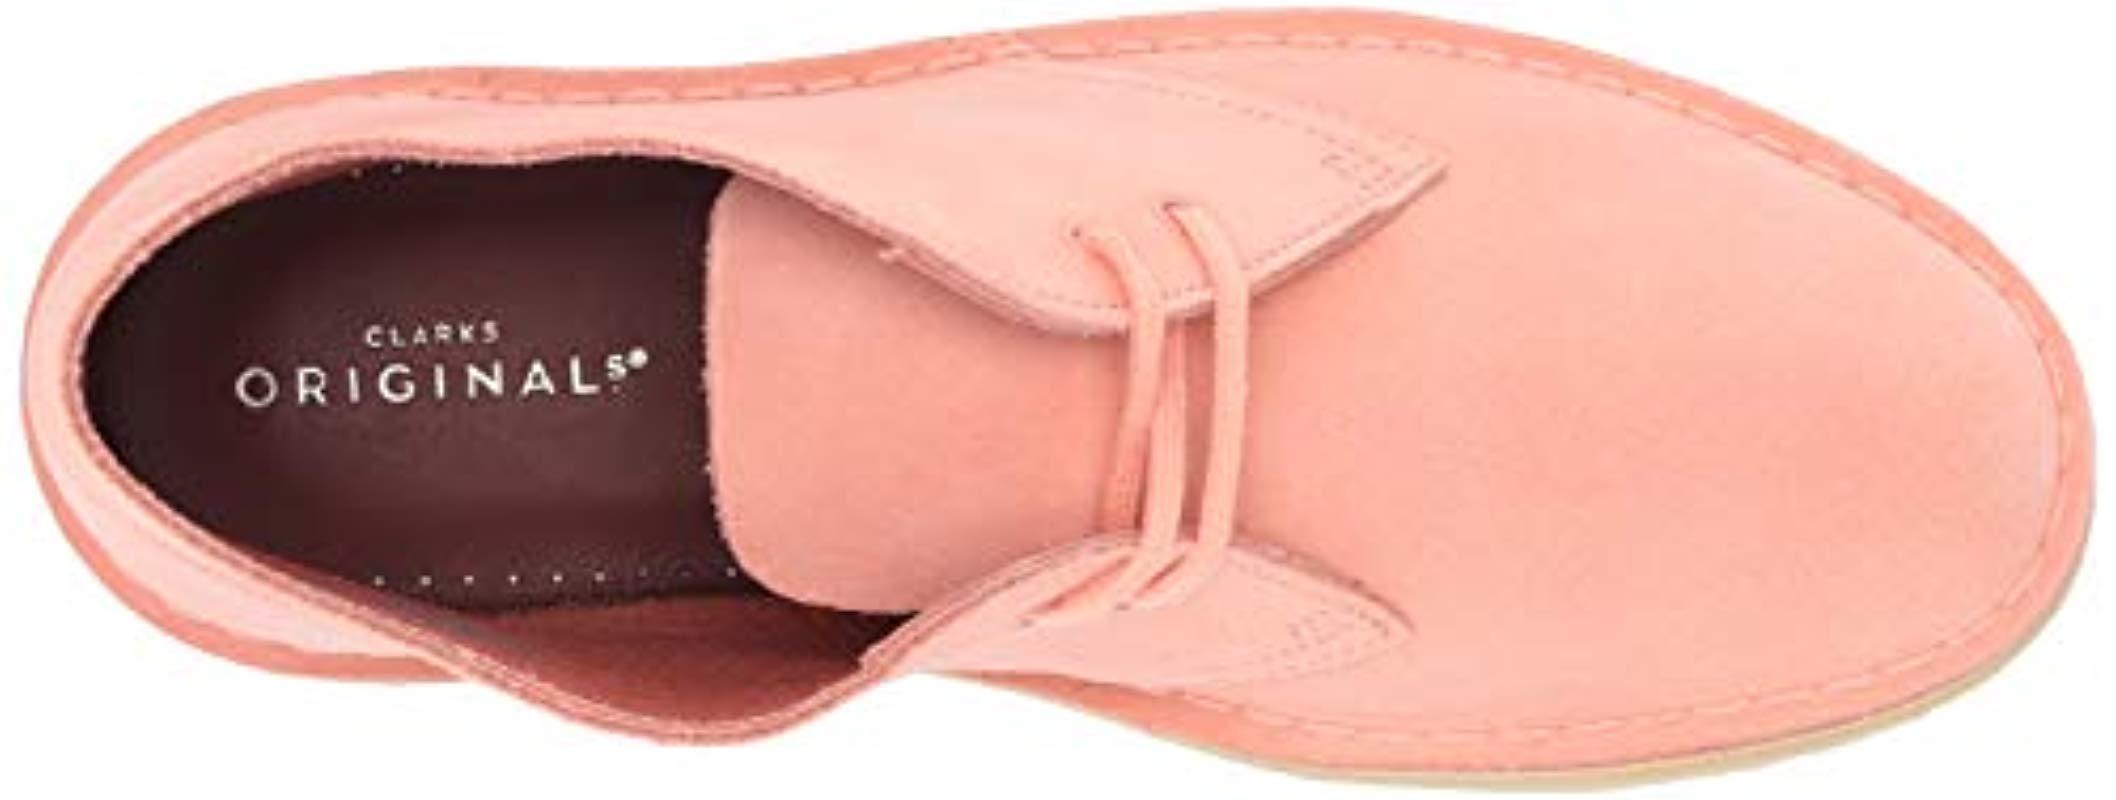 Clarks Desert Boot Ankle Bootie in Pink | Lyst